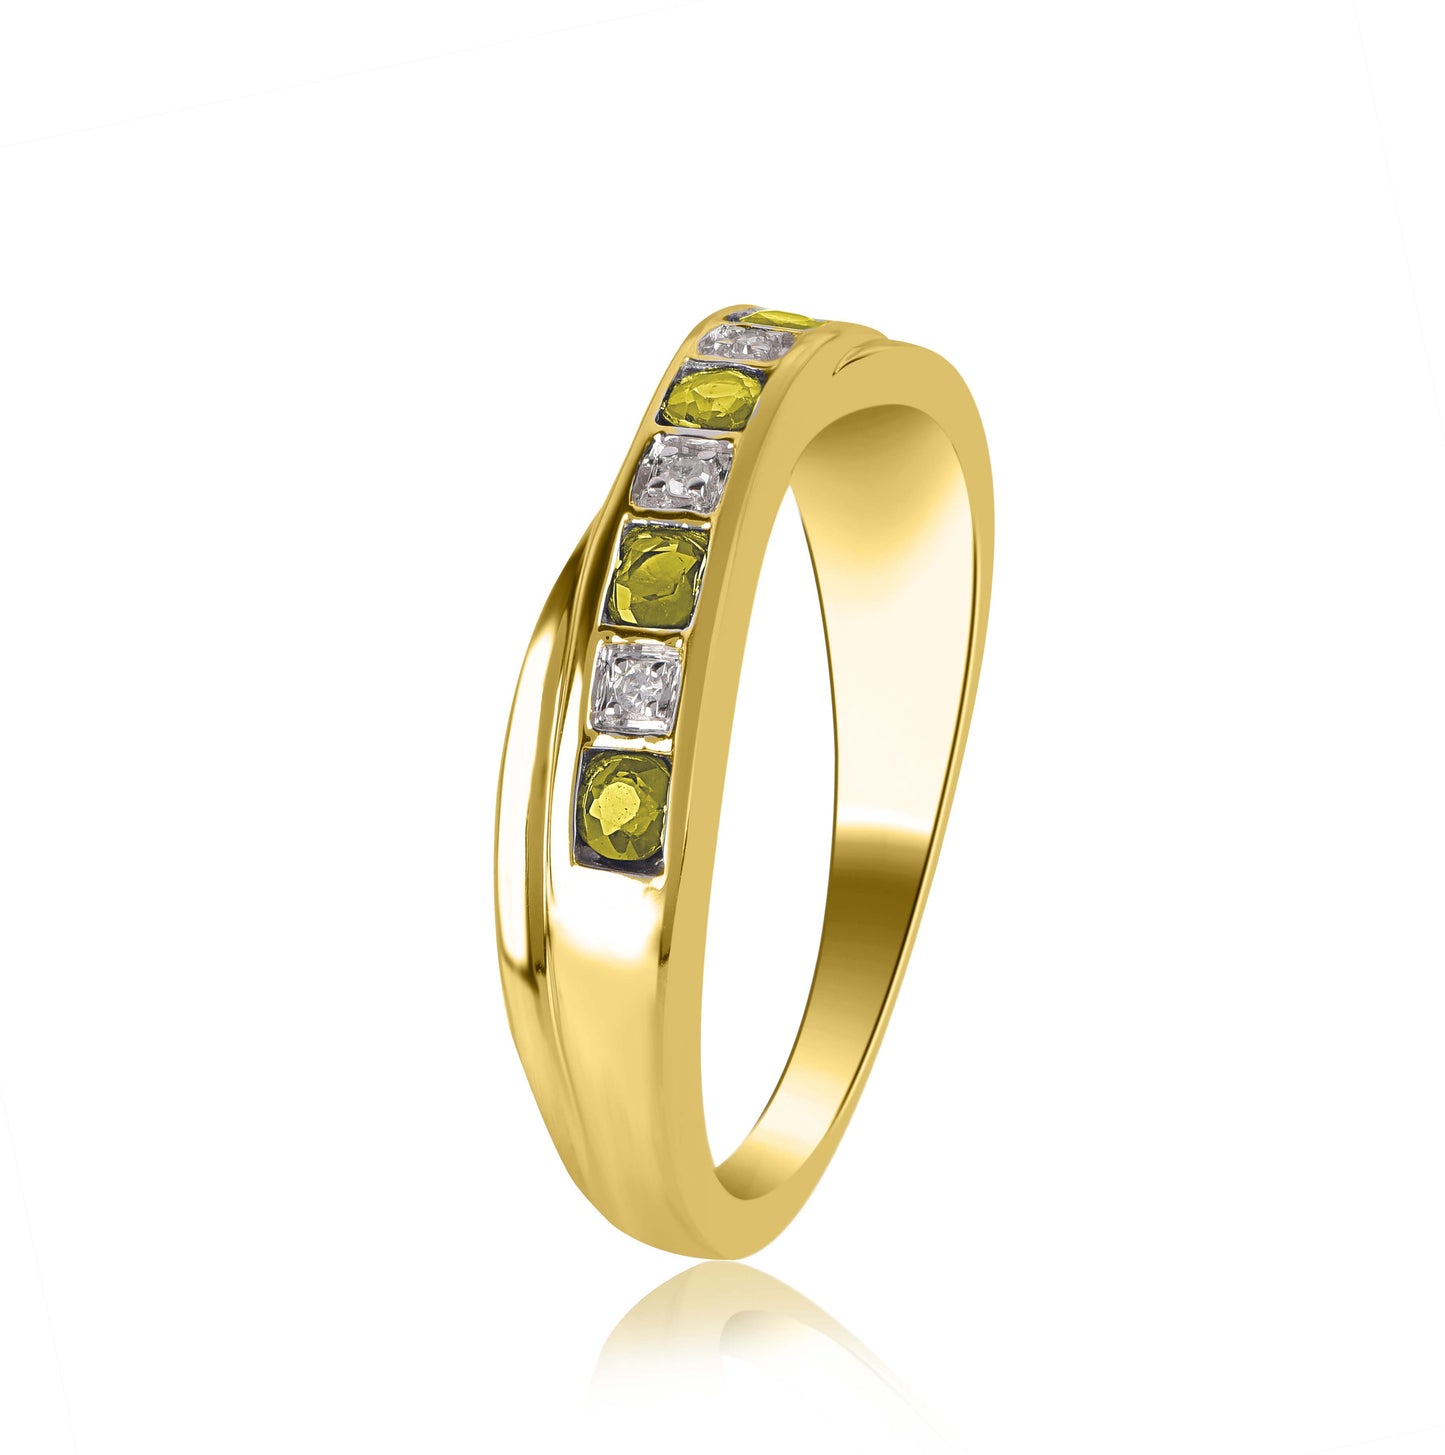 Diamond and Yellow Sapphire Criss-cross Ring in 10K Gold